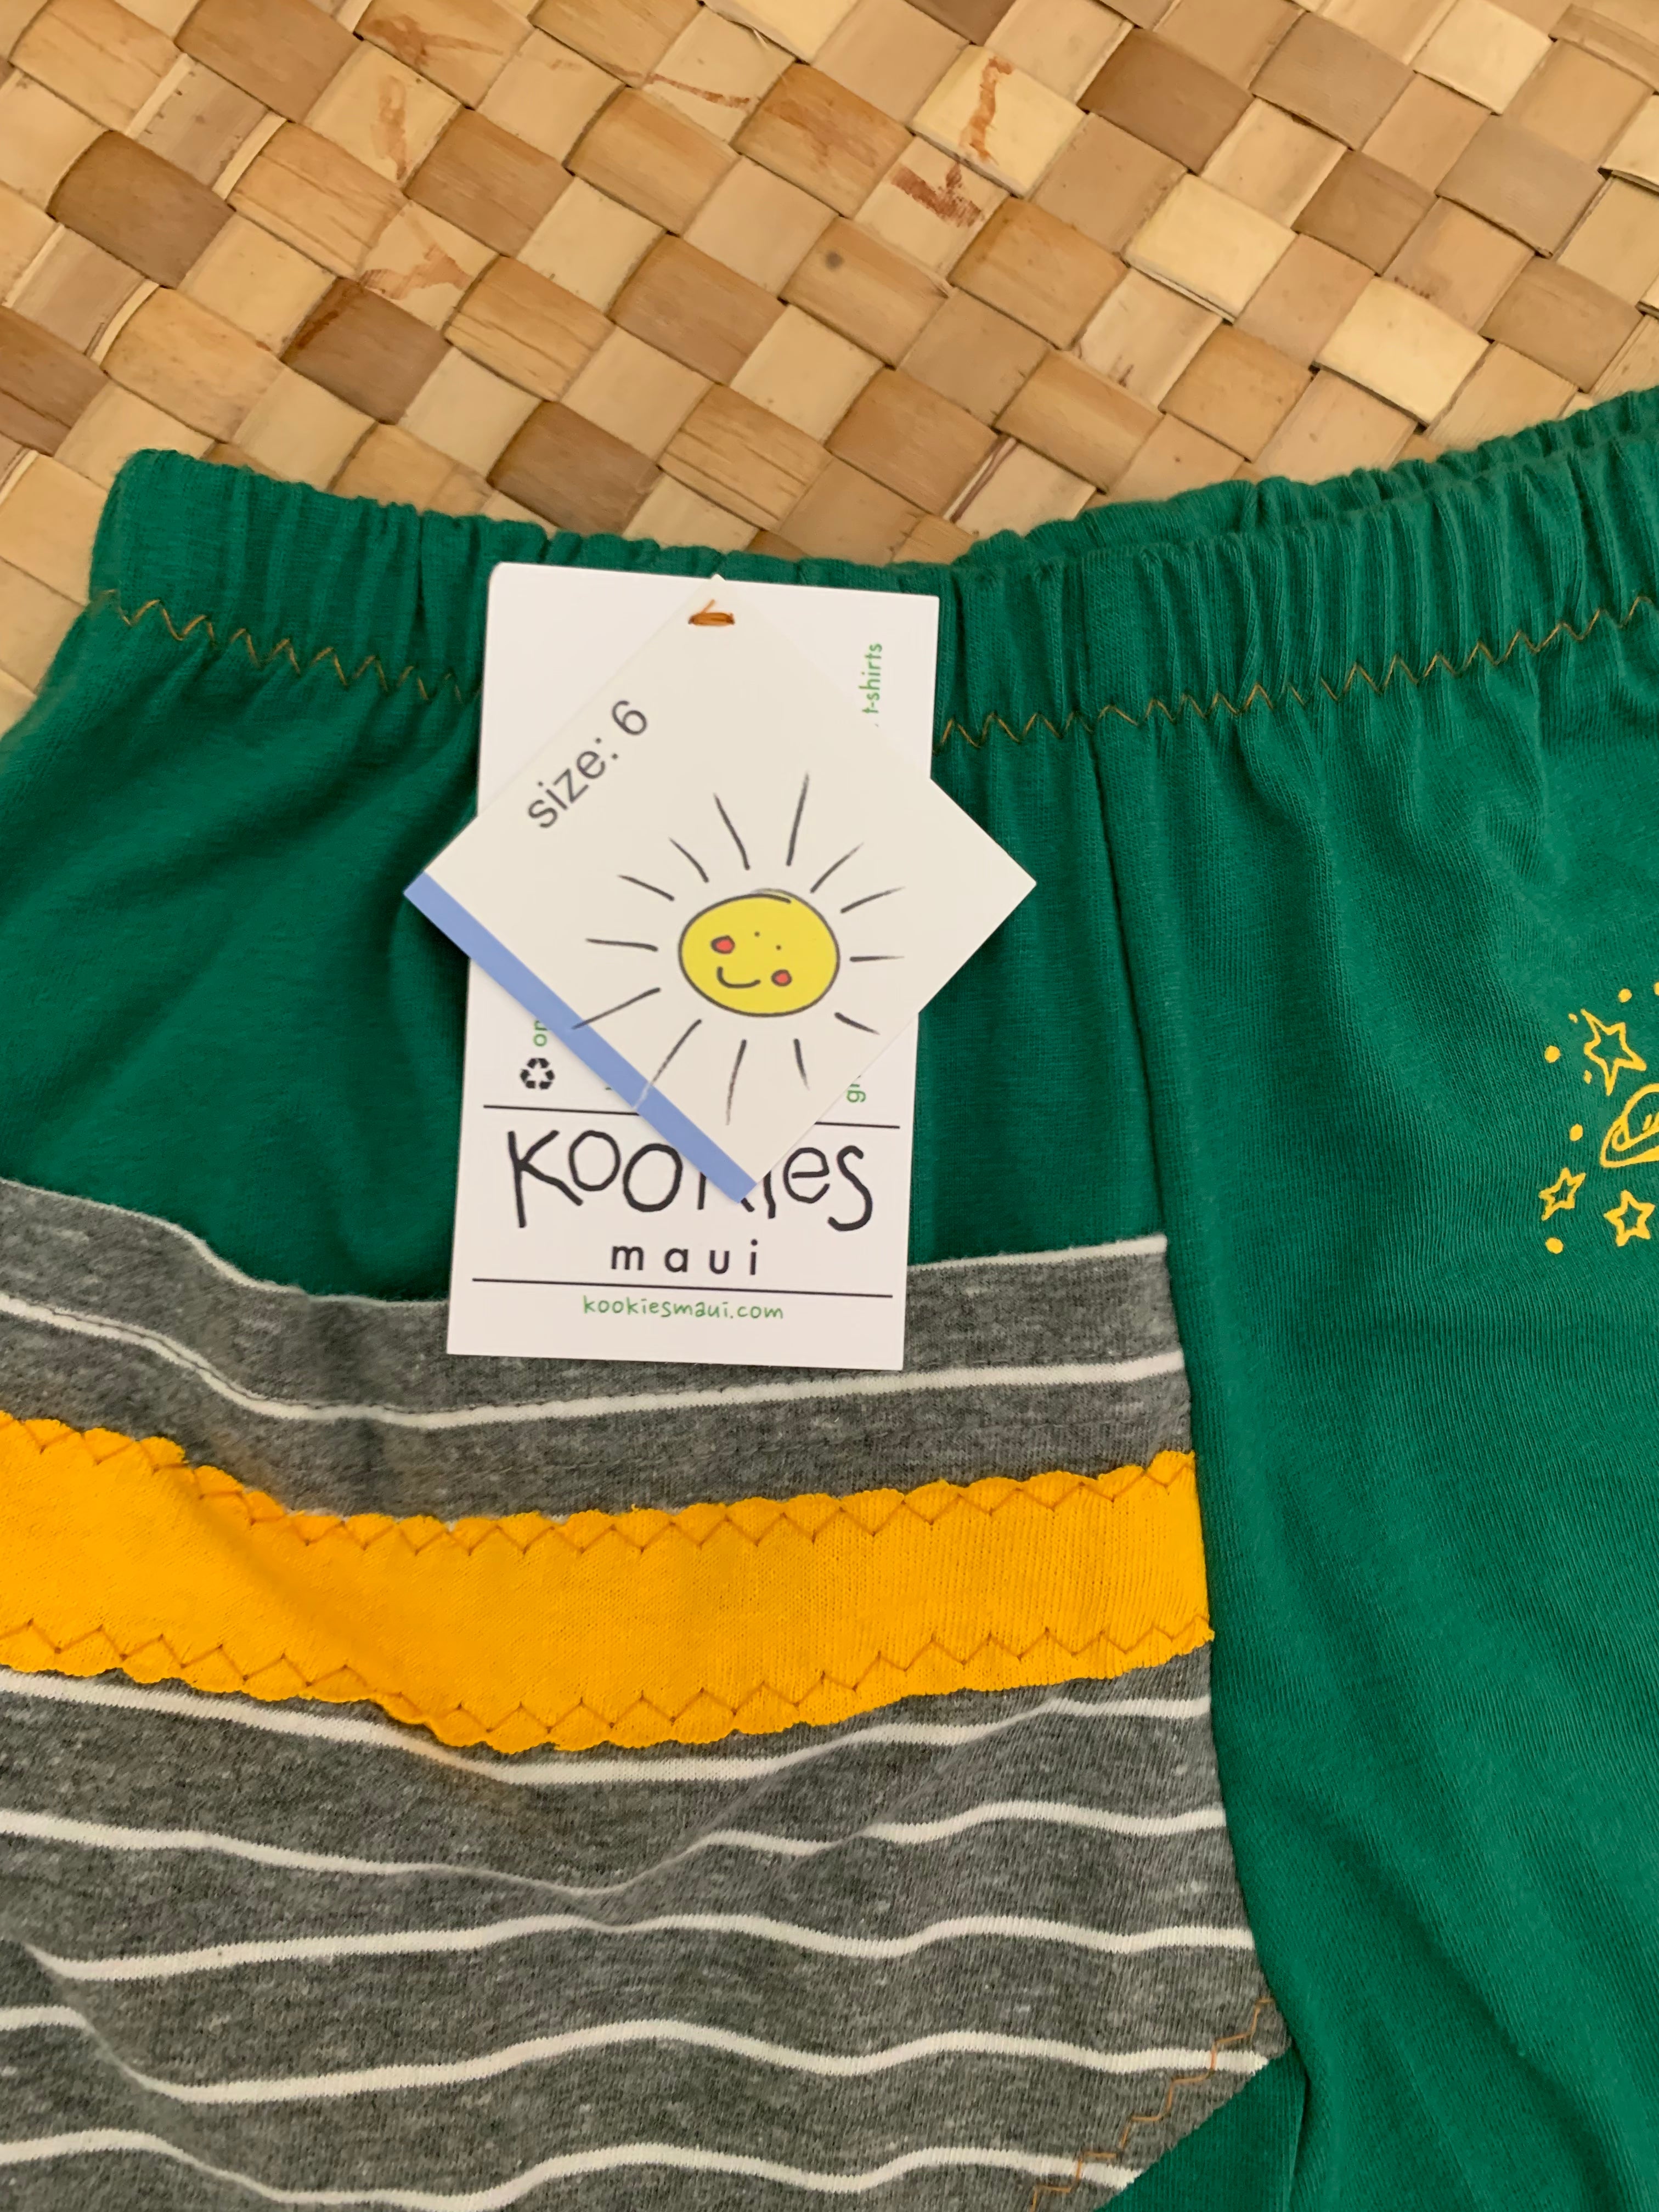 Kids Size 6 "Green & Yellow Camp Know Where" ʻOpihi Picker Pants